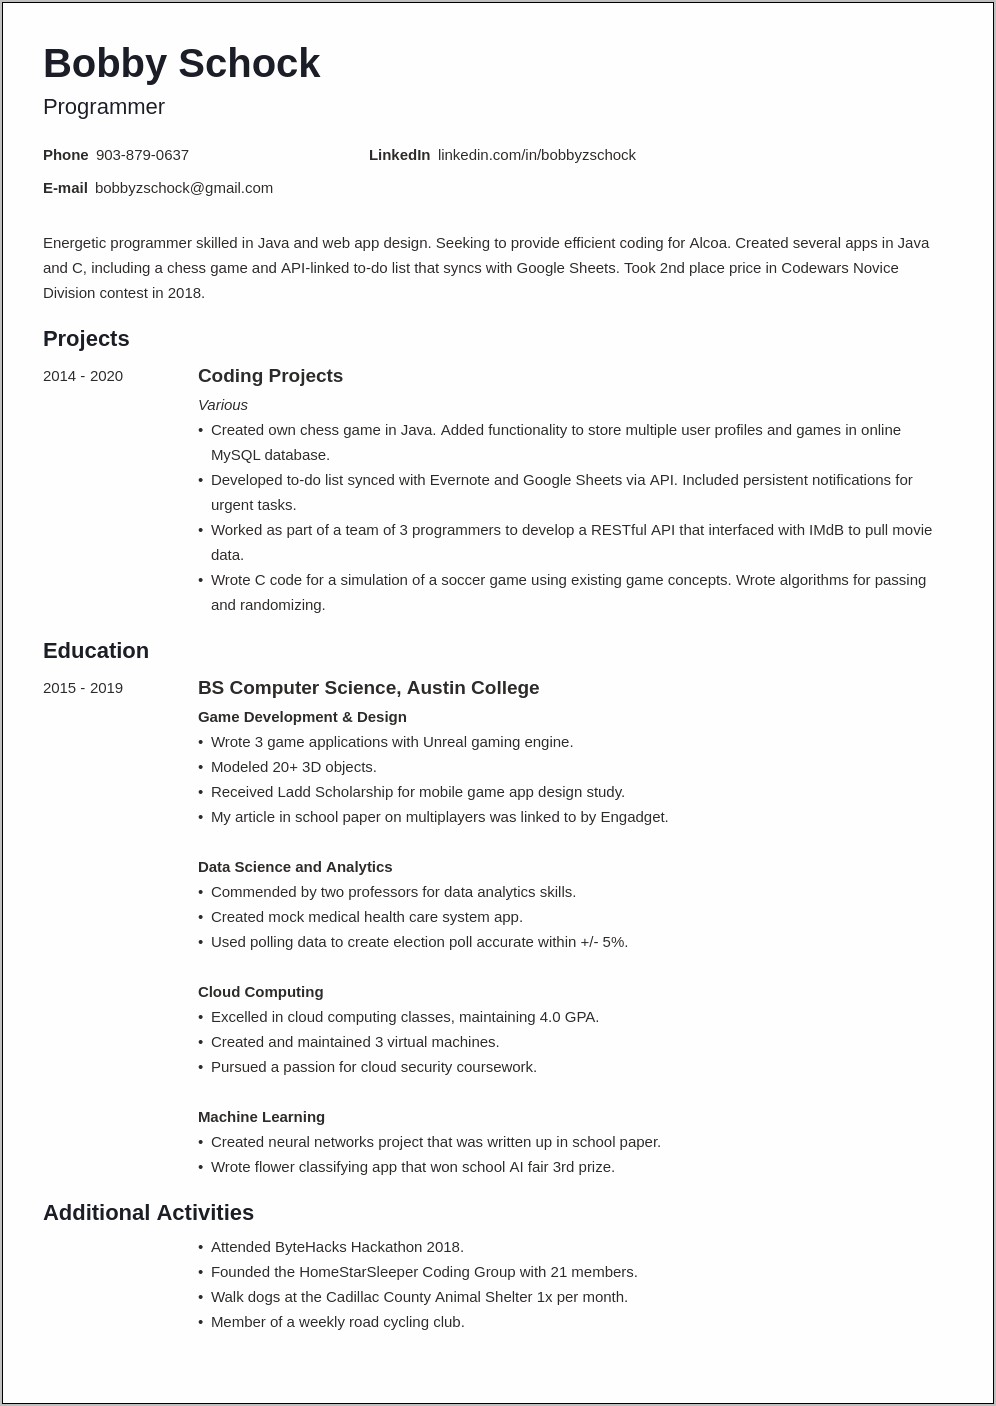 Resume For Job Seeker With Experience